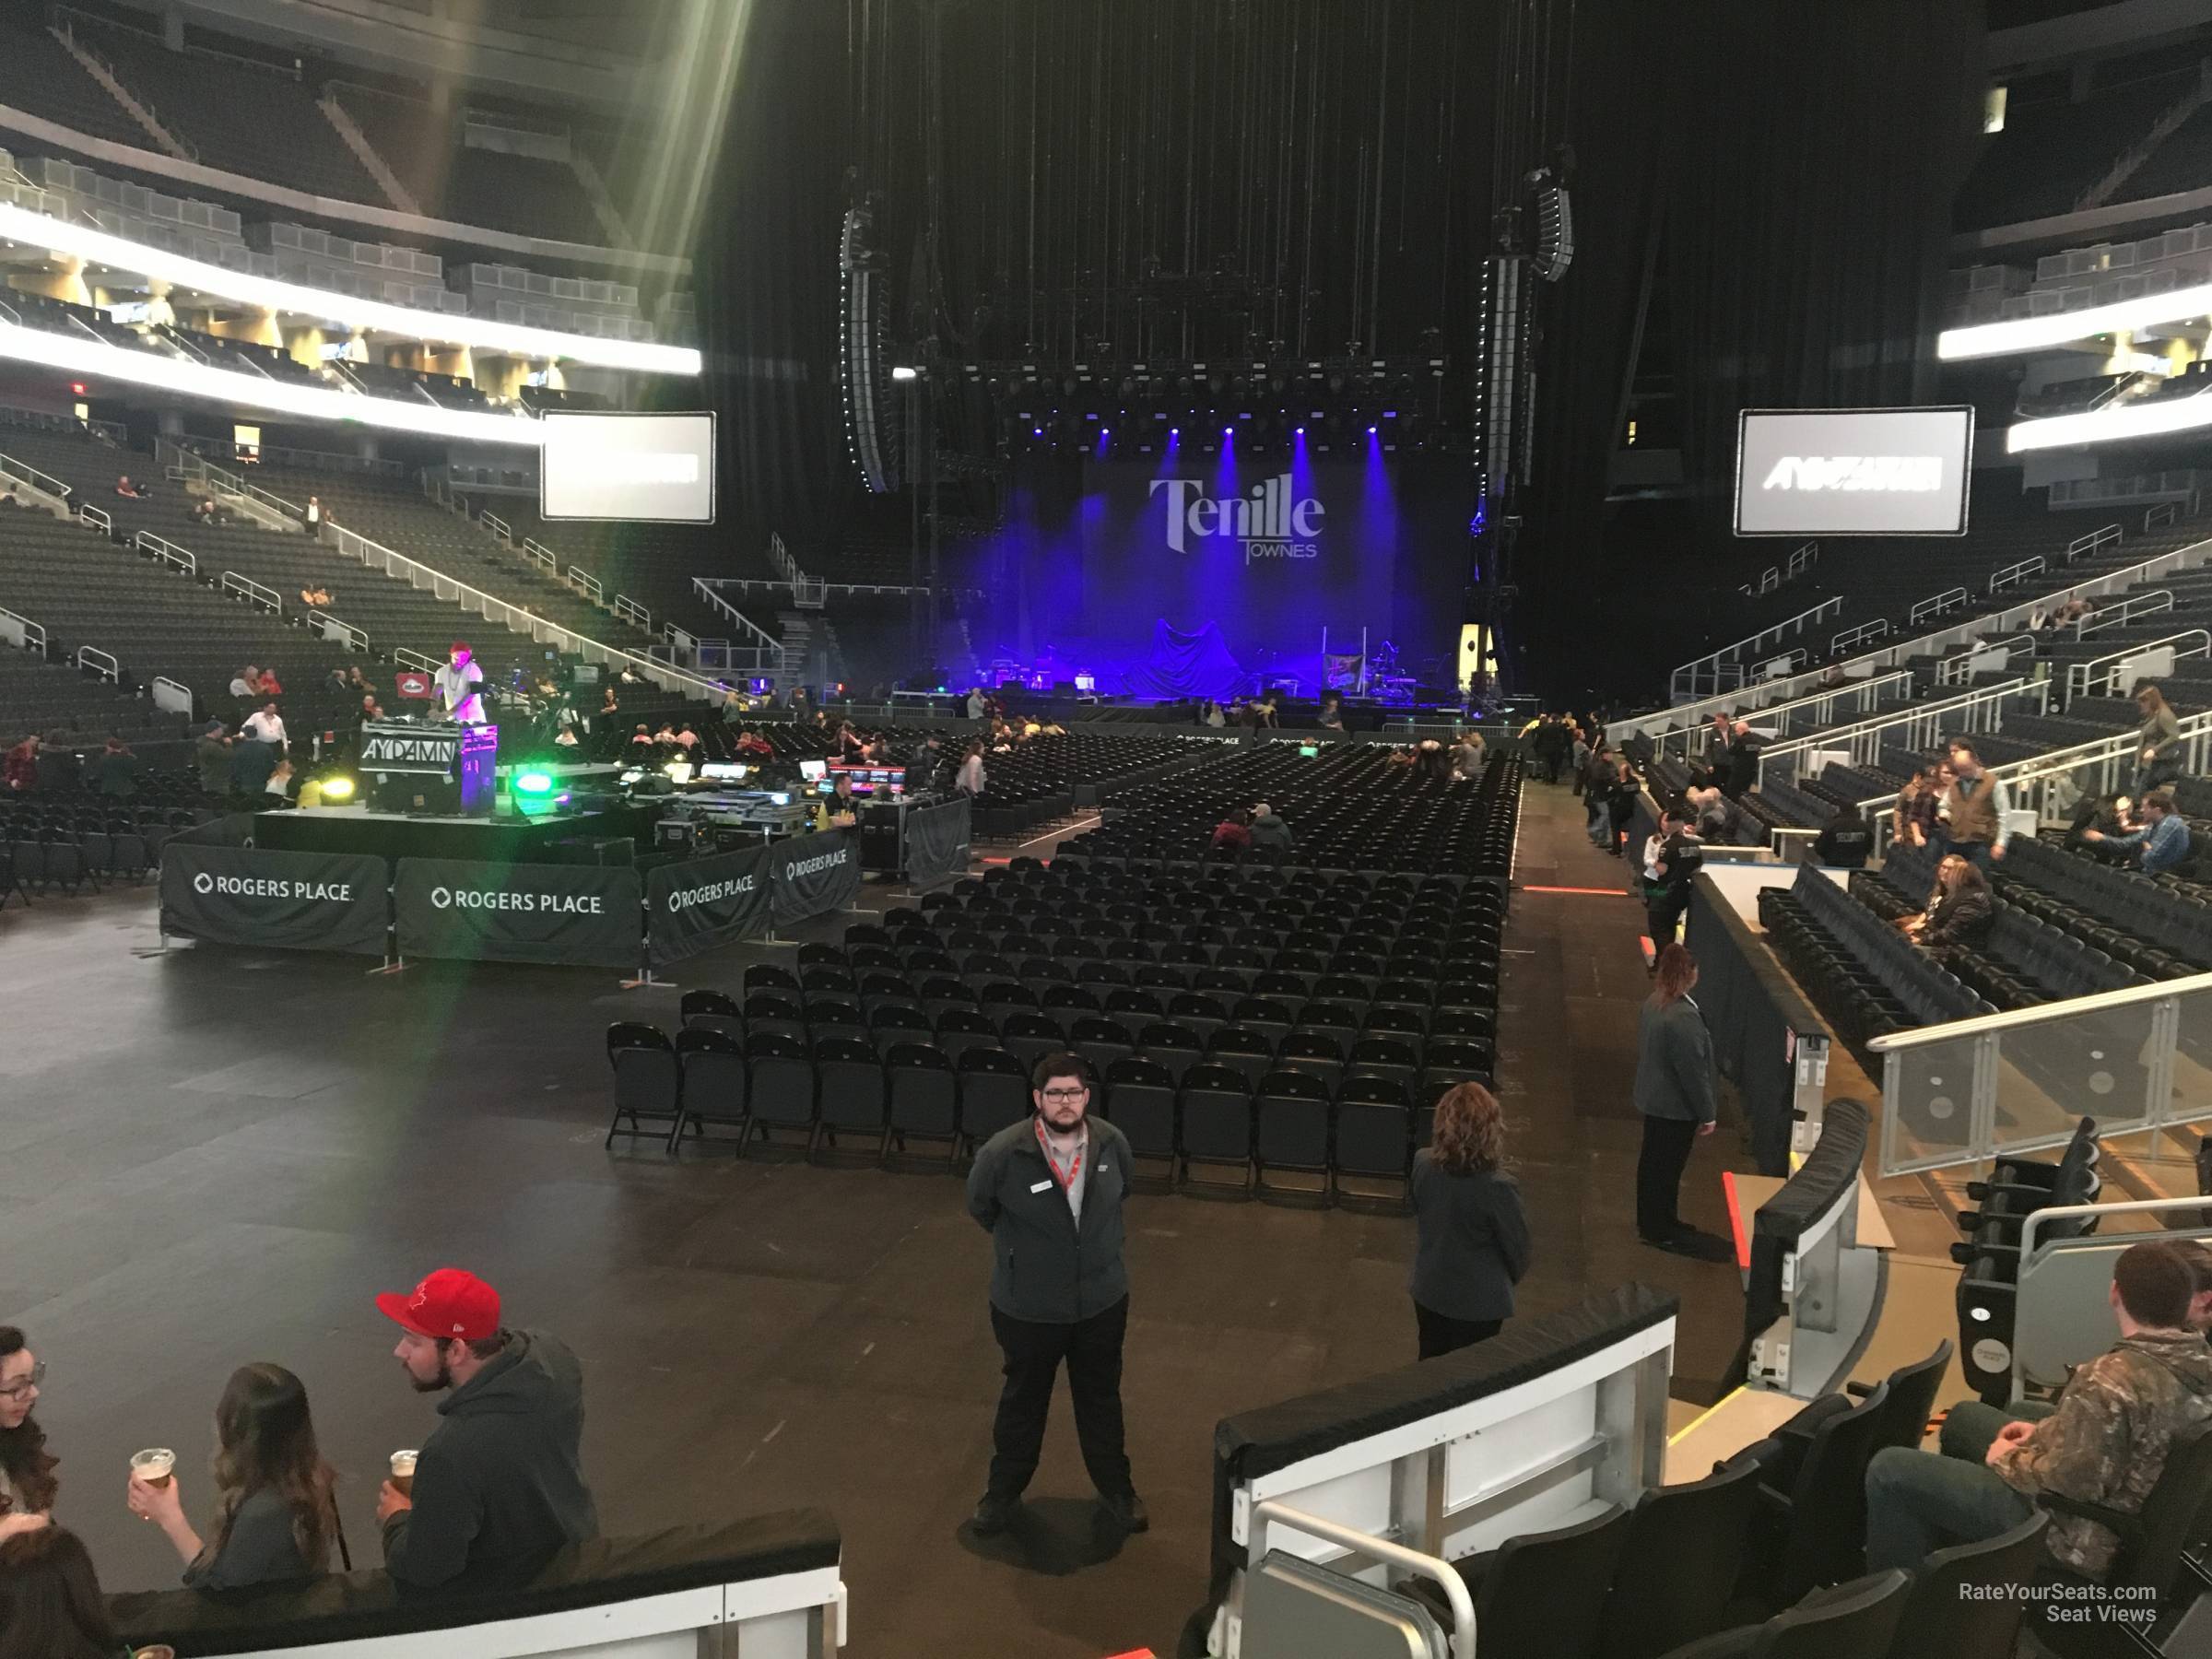 section 109, row 5 seat view  for concert - rogers place